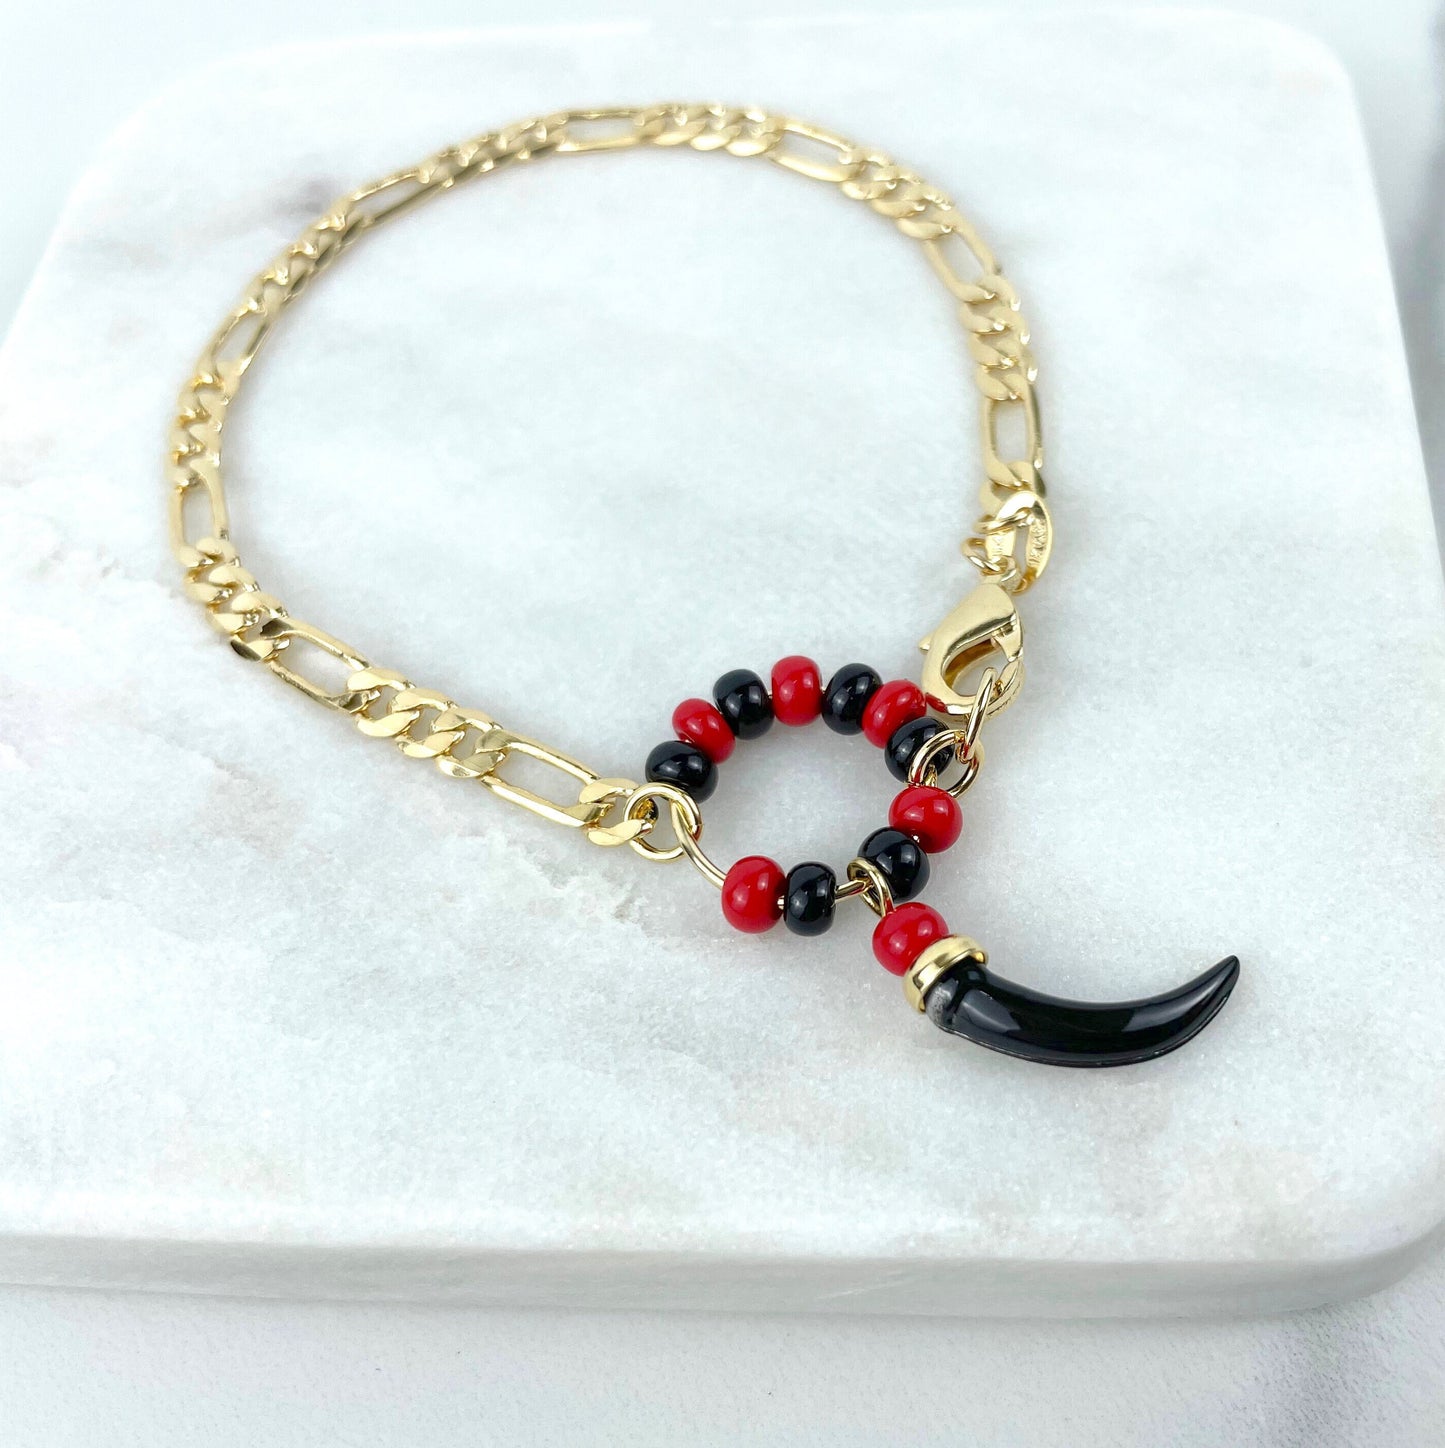 18k Gold Filled 4mm Mariner Link, Red & Black Beads in Circle, Azabache Style, Black Chili Charms Bracelet, Wholesale Jewelry Supplies